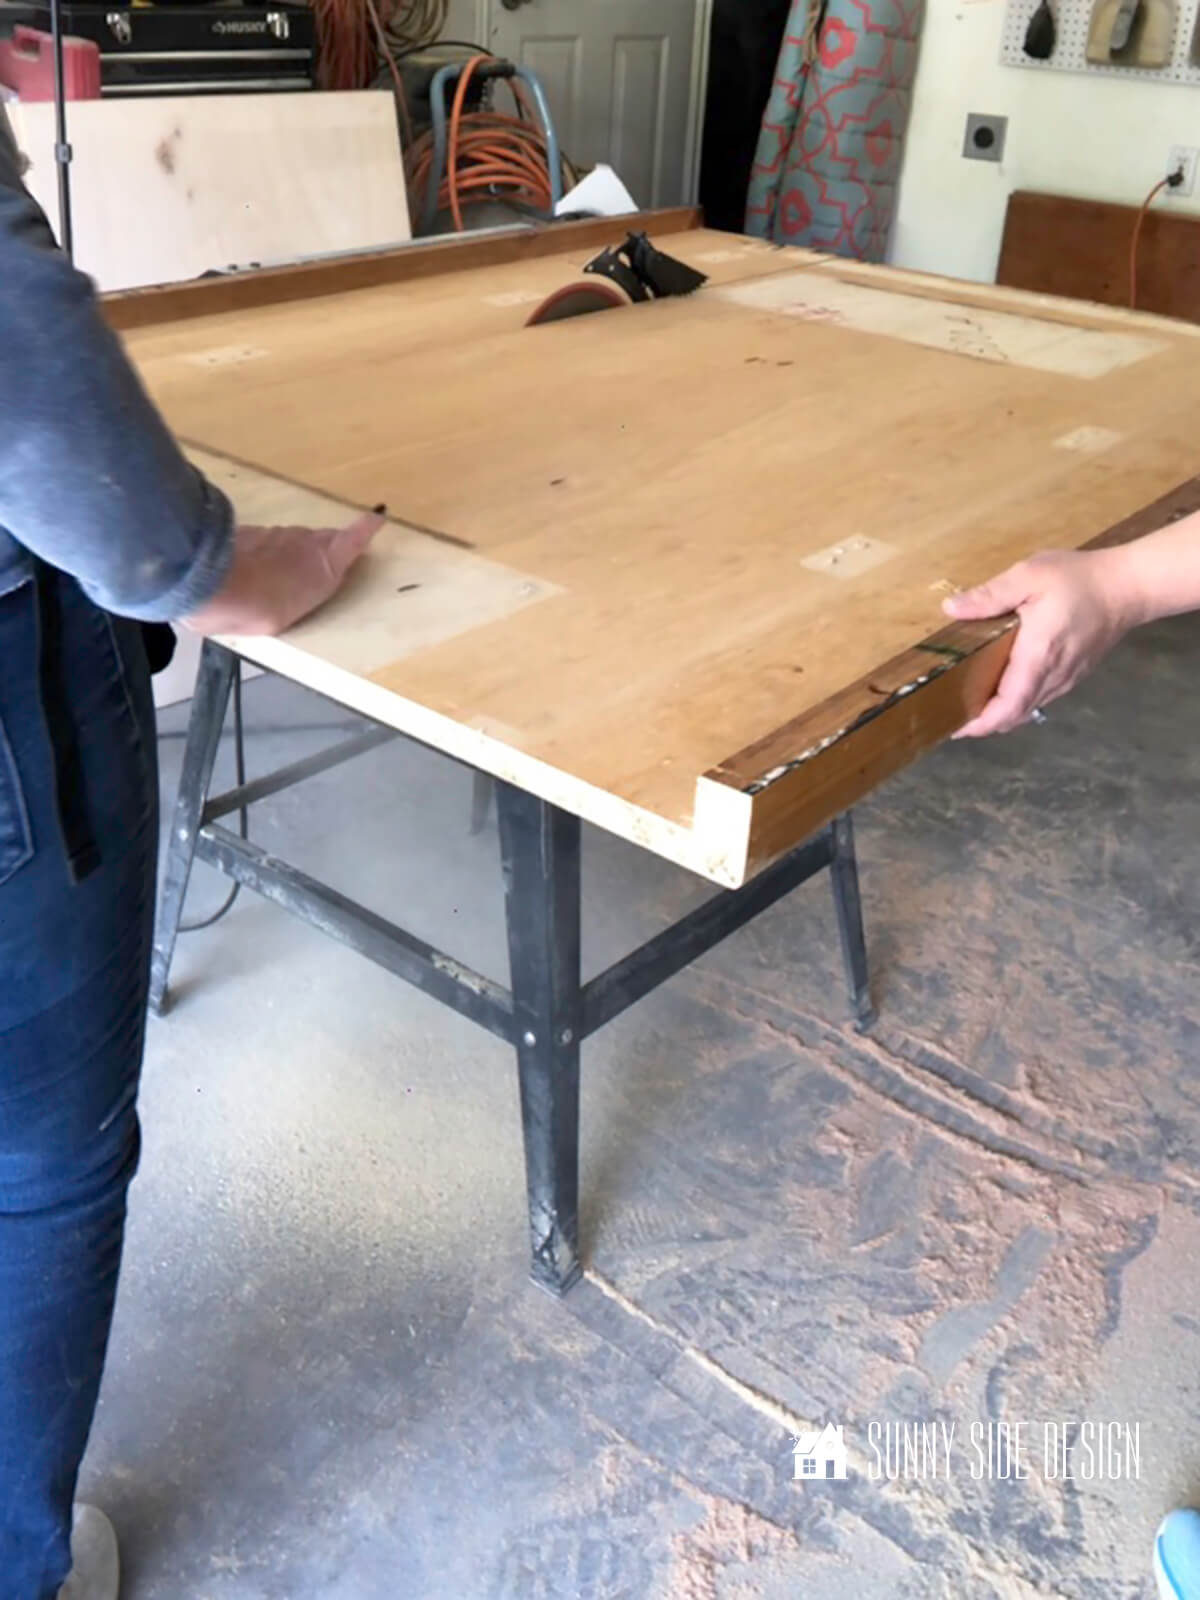 Woman standing at the table saw guiding wood laundry room folding table top.